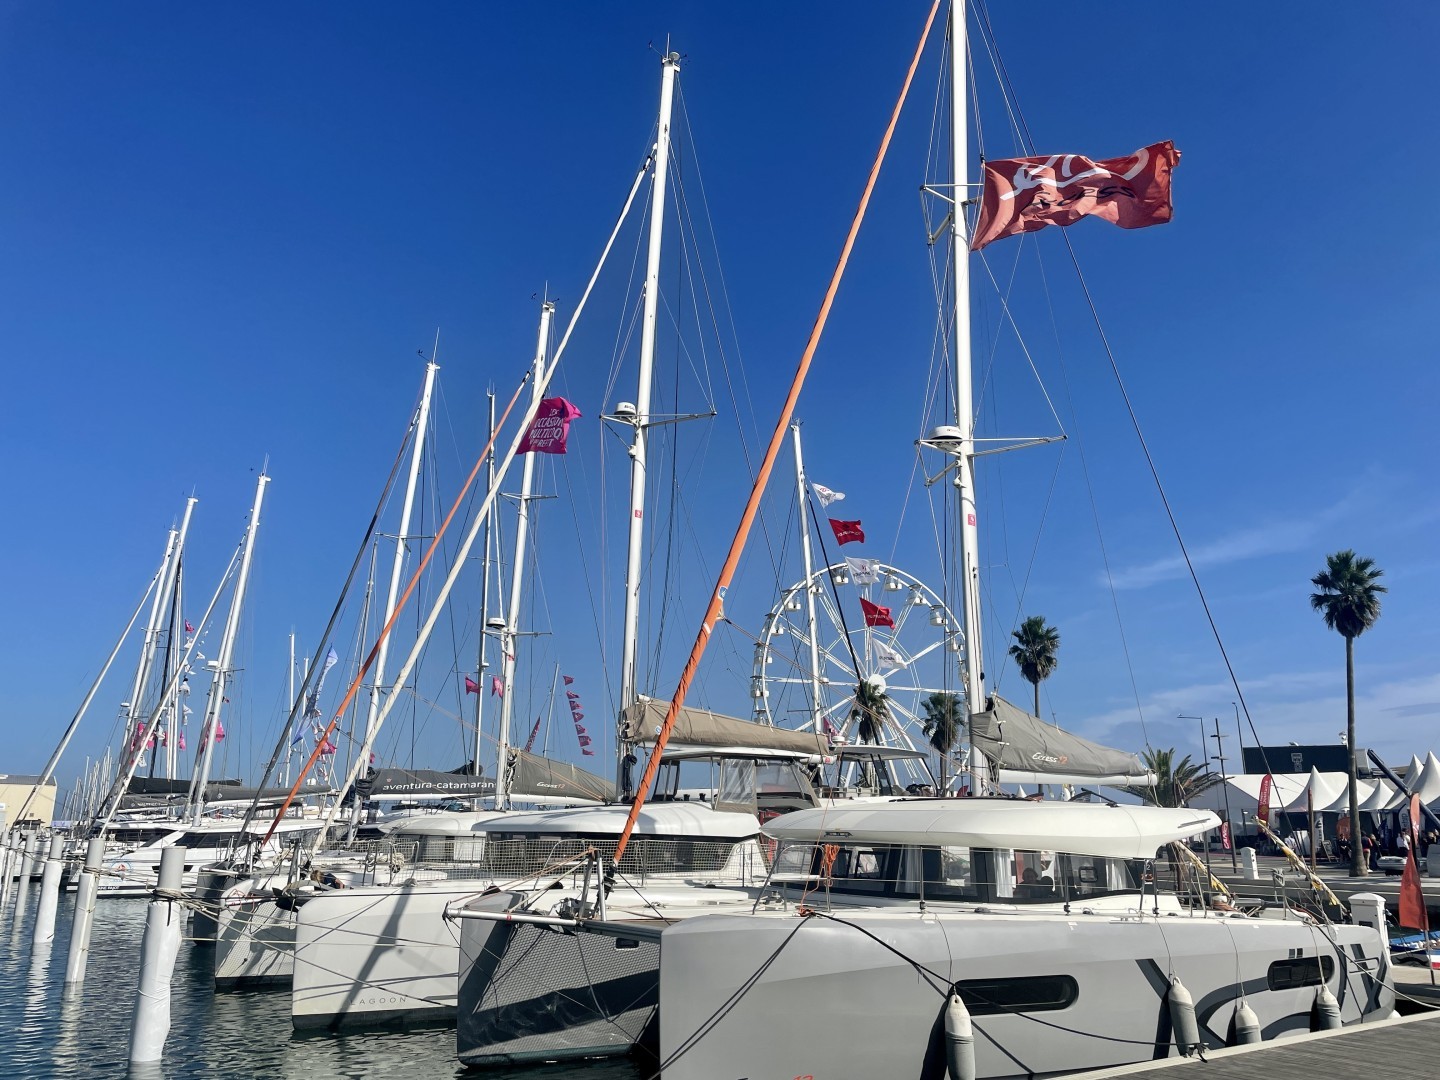 Sunny days at the Second-hand Multihull and Refit boat show in France